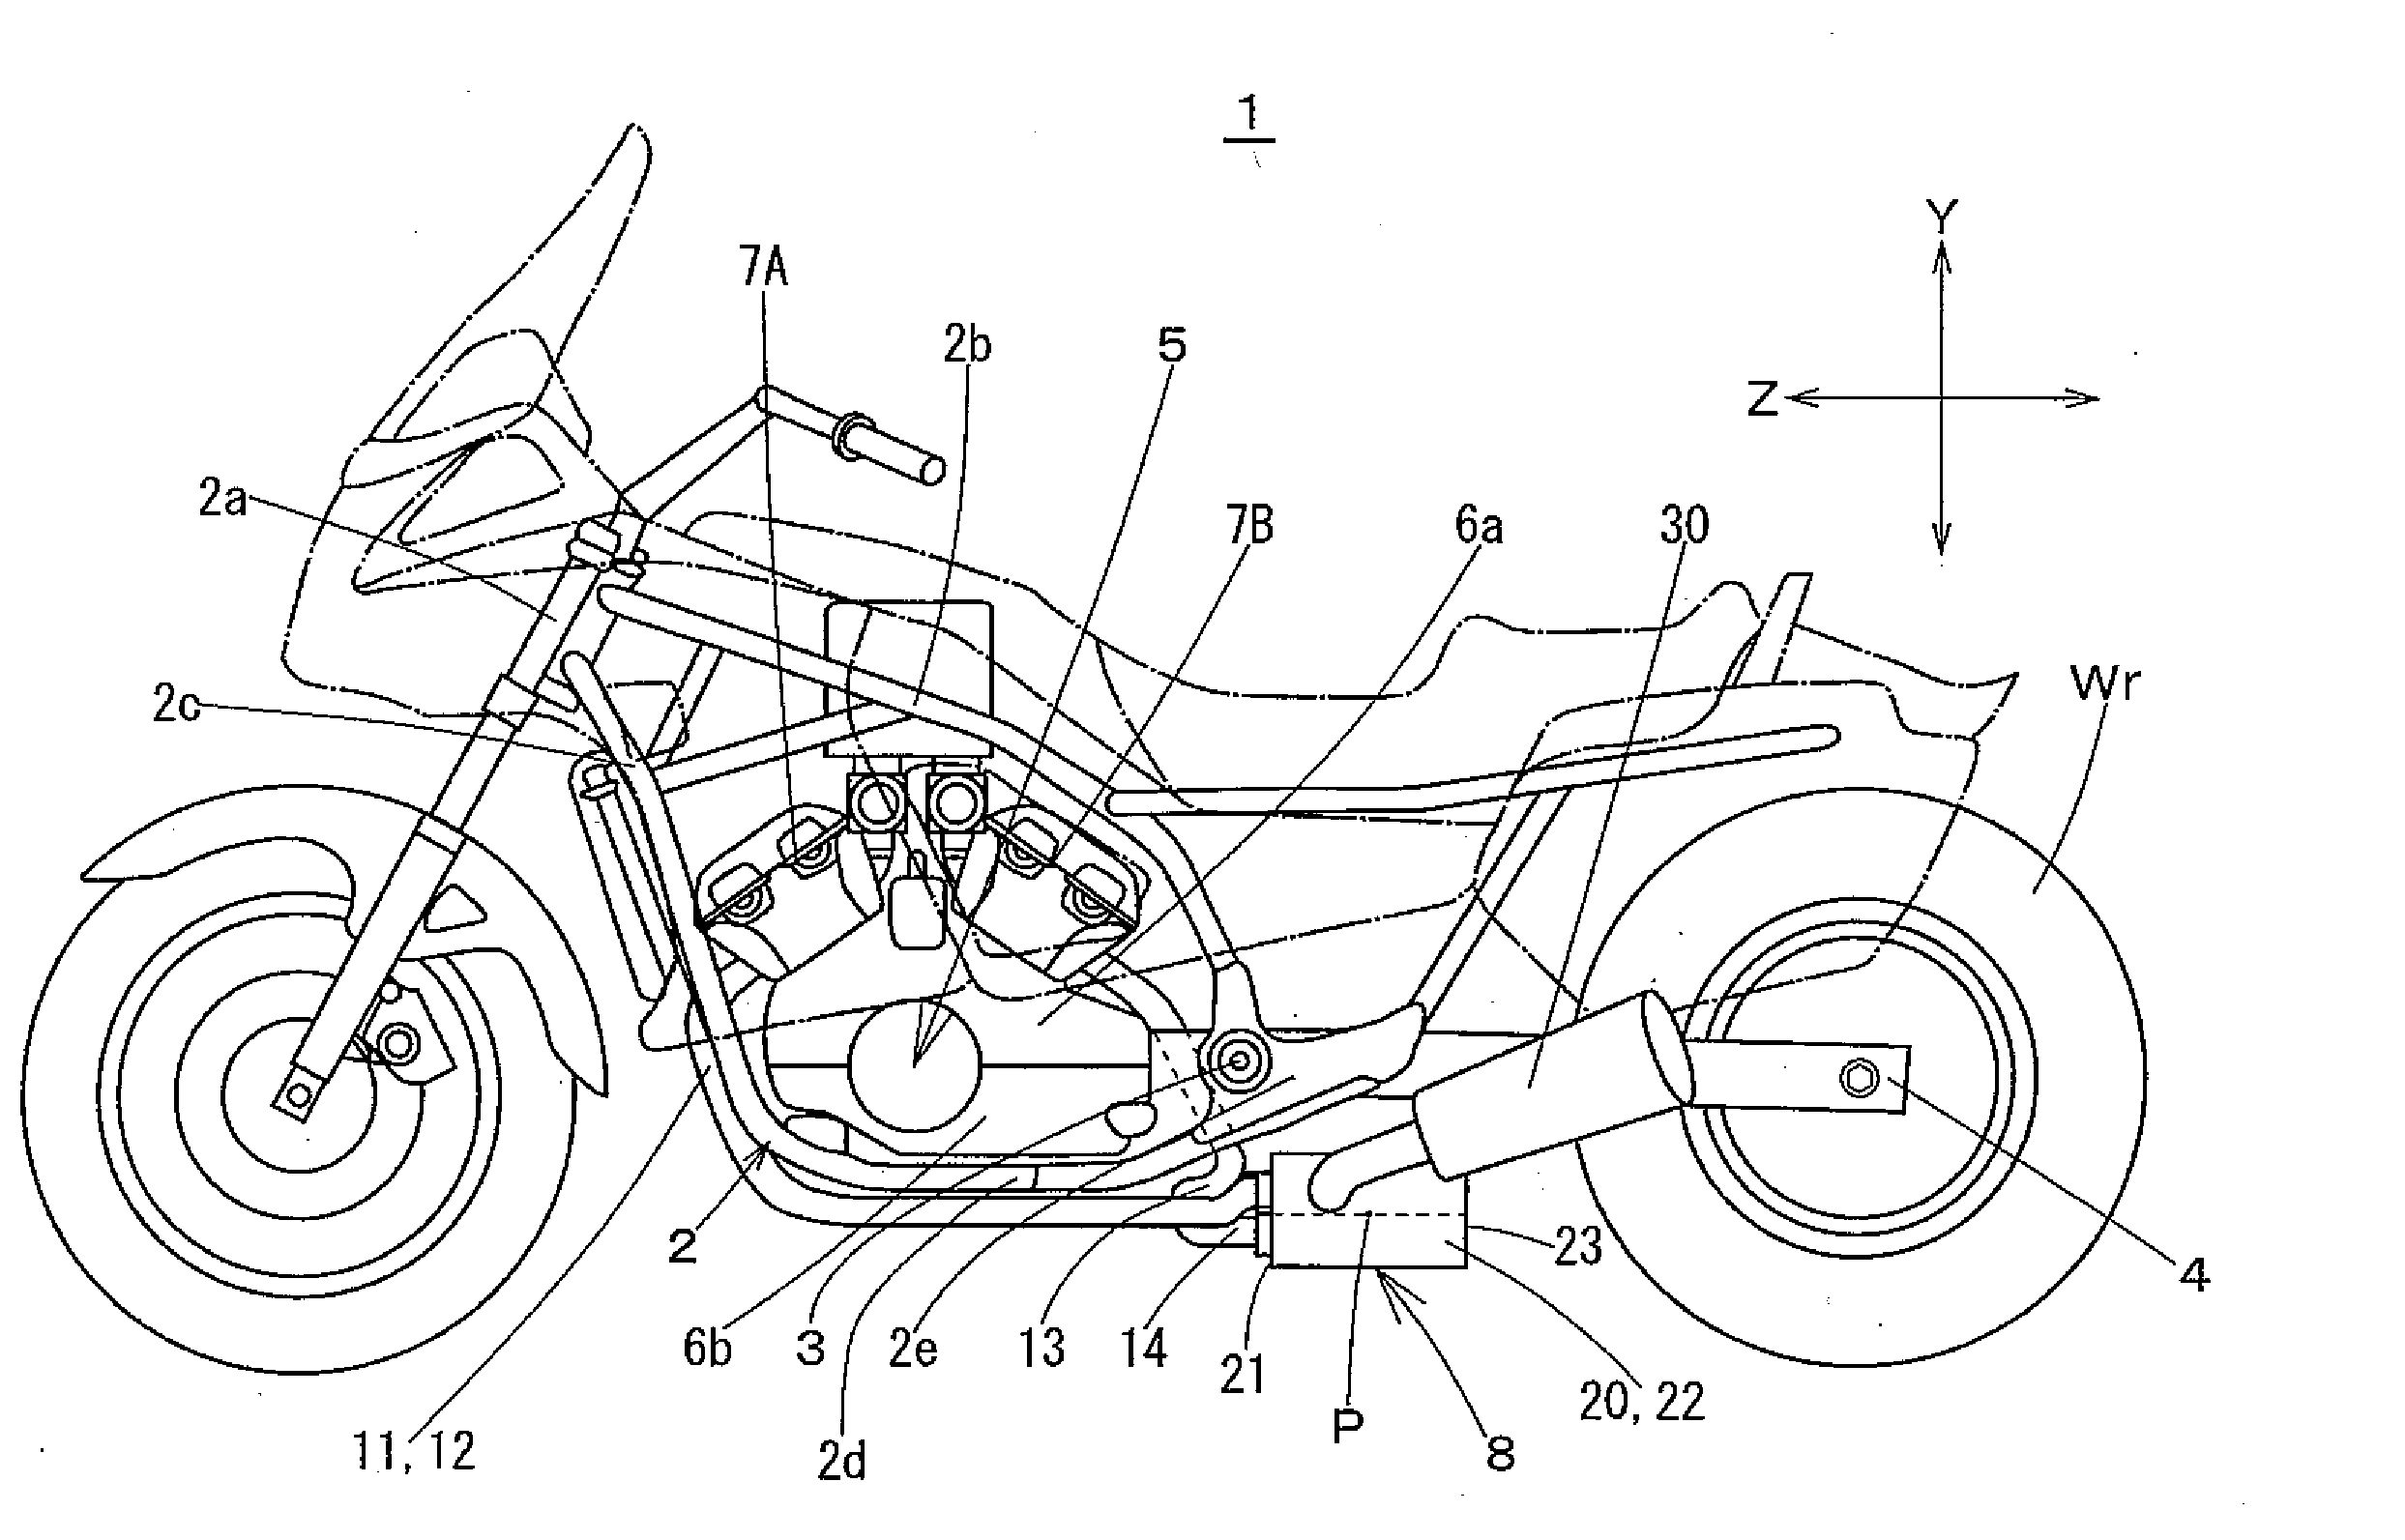 Exhaust System and Saddle-Ride Type Vehicle